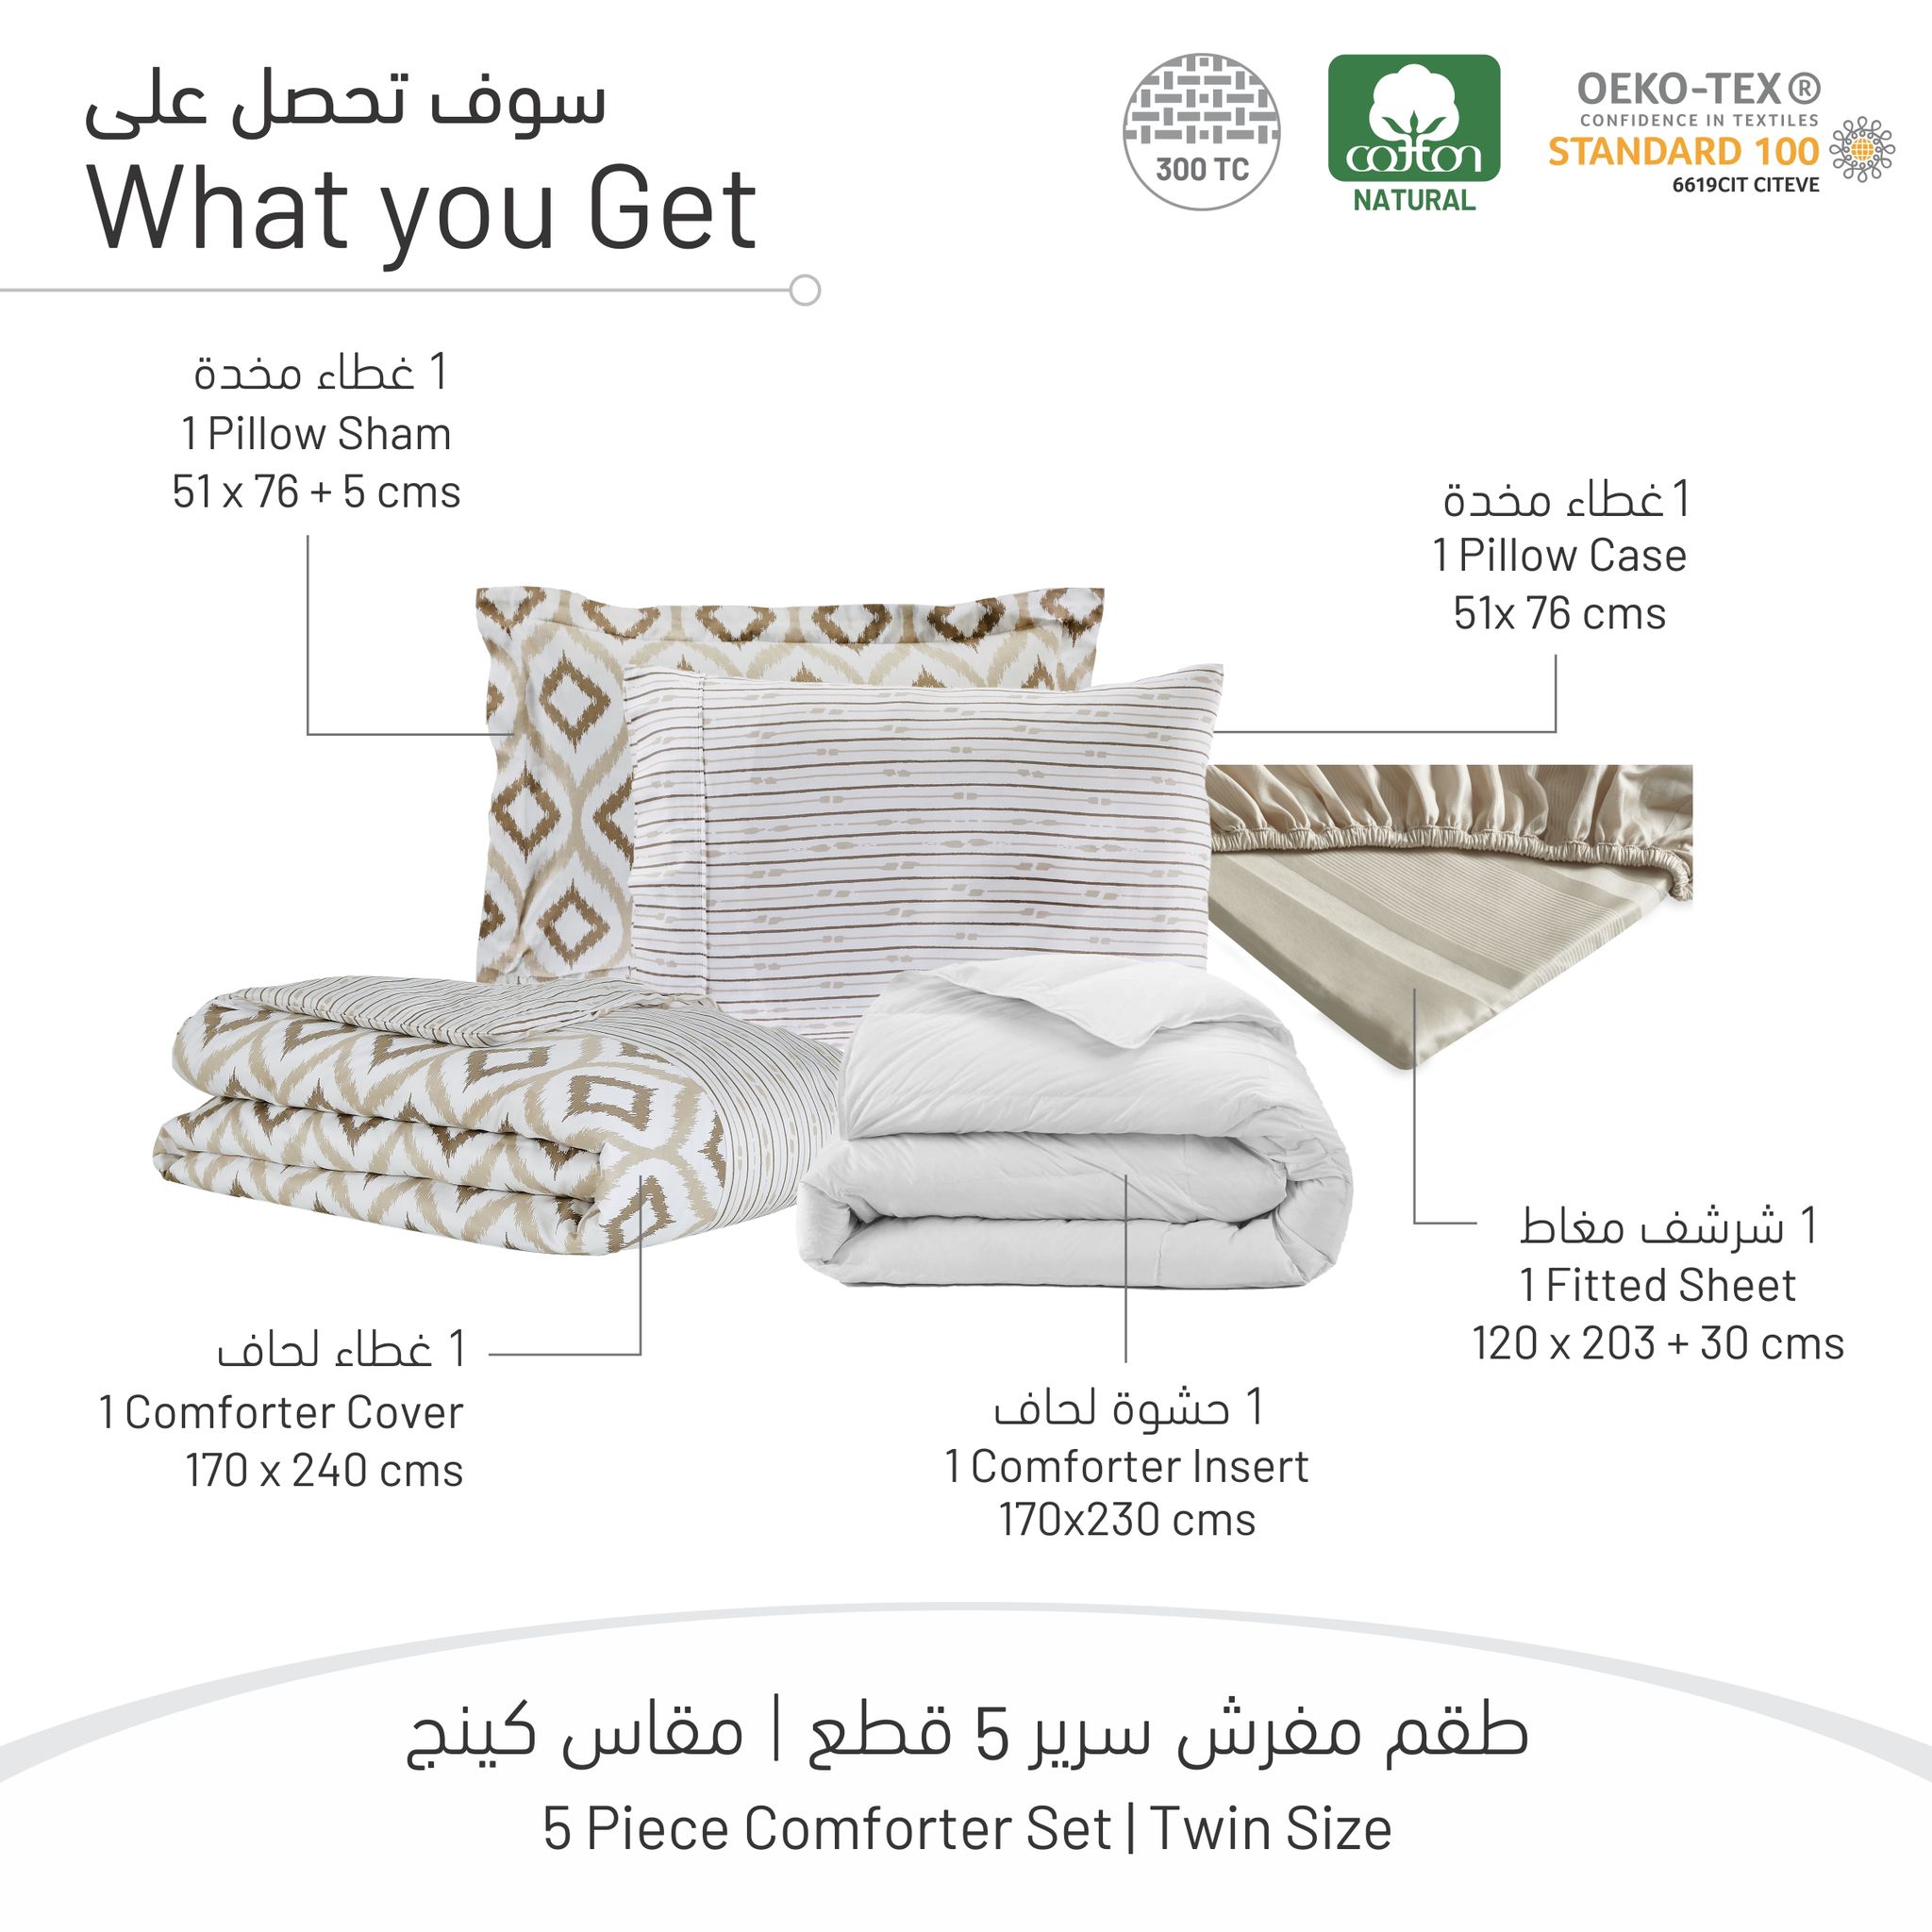 5-Piece Cotton Comforter Set With Removable Filler - Single Size 170 x 230 Cms Taupe/White .